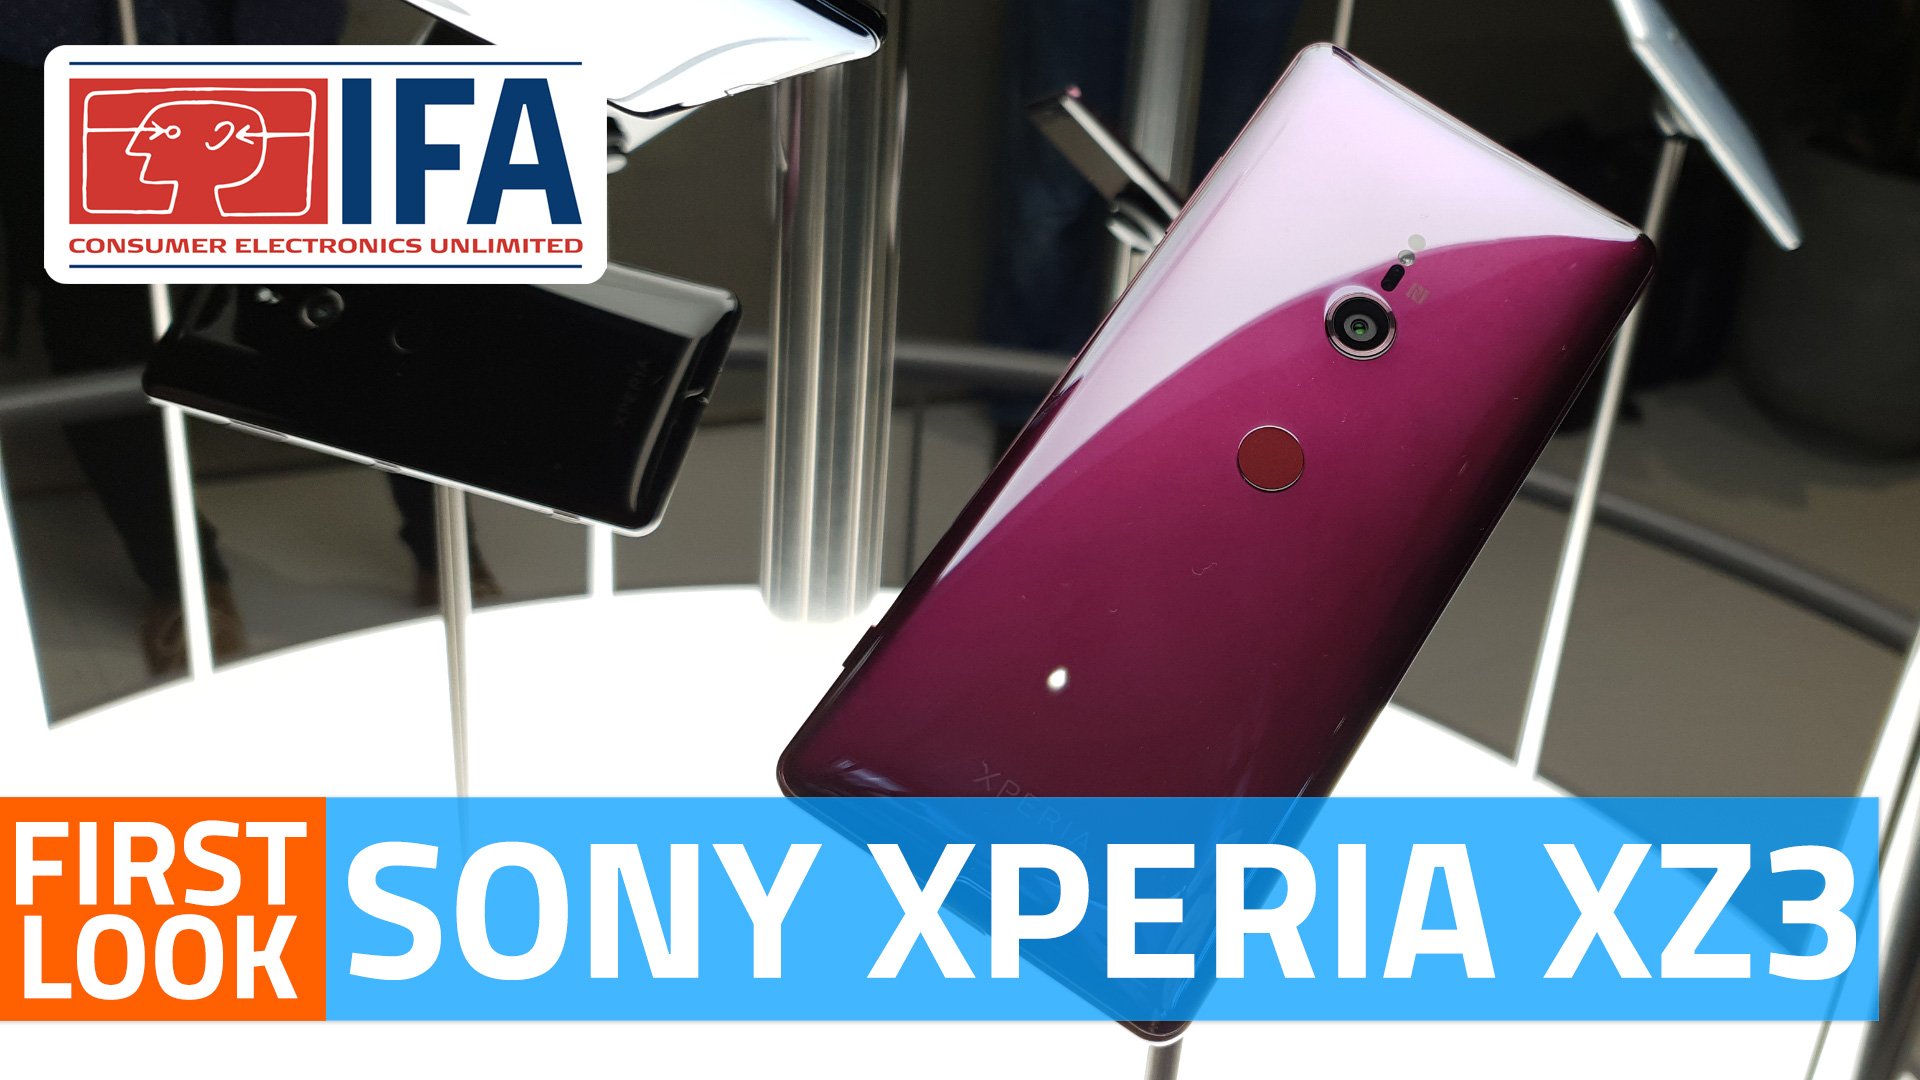 Gadgets 360 Pa Twitter Here S Our First Look At The Sony Xperia Xz3 Let Us Know If You Have Any Questions About The Phone Ifa18 T Co 7q1axmccza Twitter